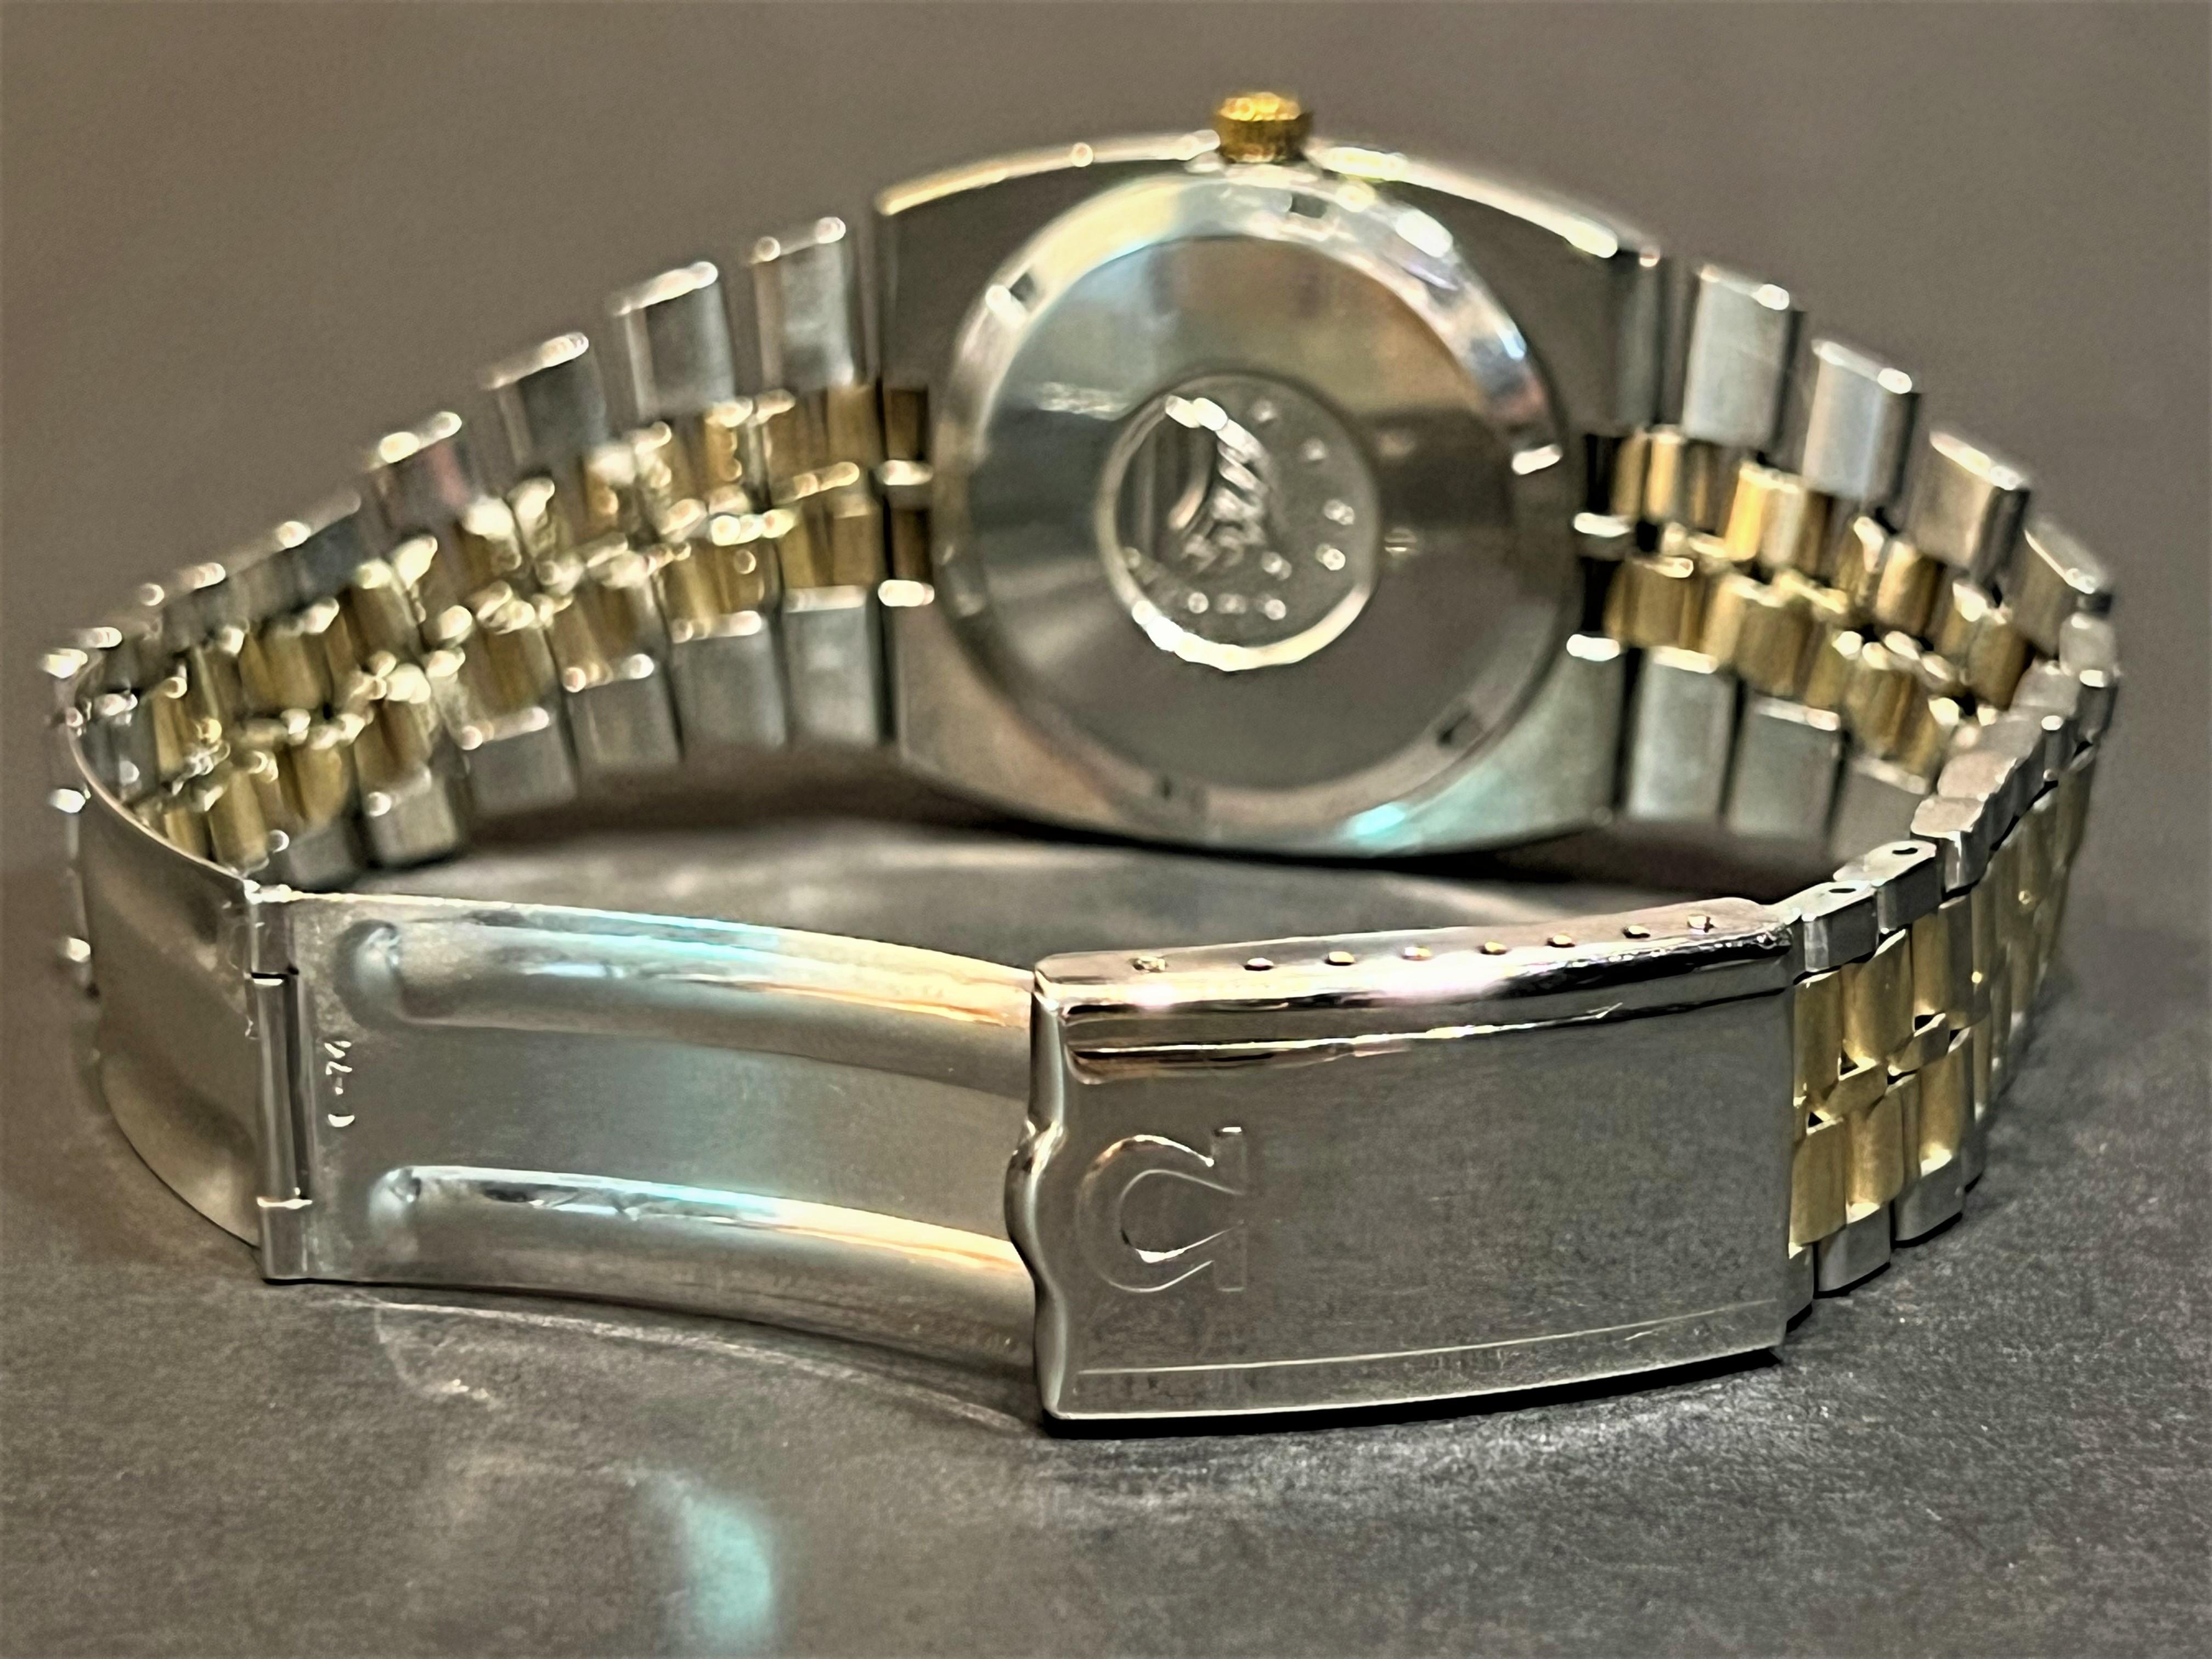 Day-Date Omega Constellation Chronometer Wristwatch In Good Condition For Sale In Bradford, Ontario